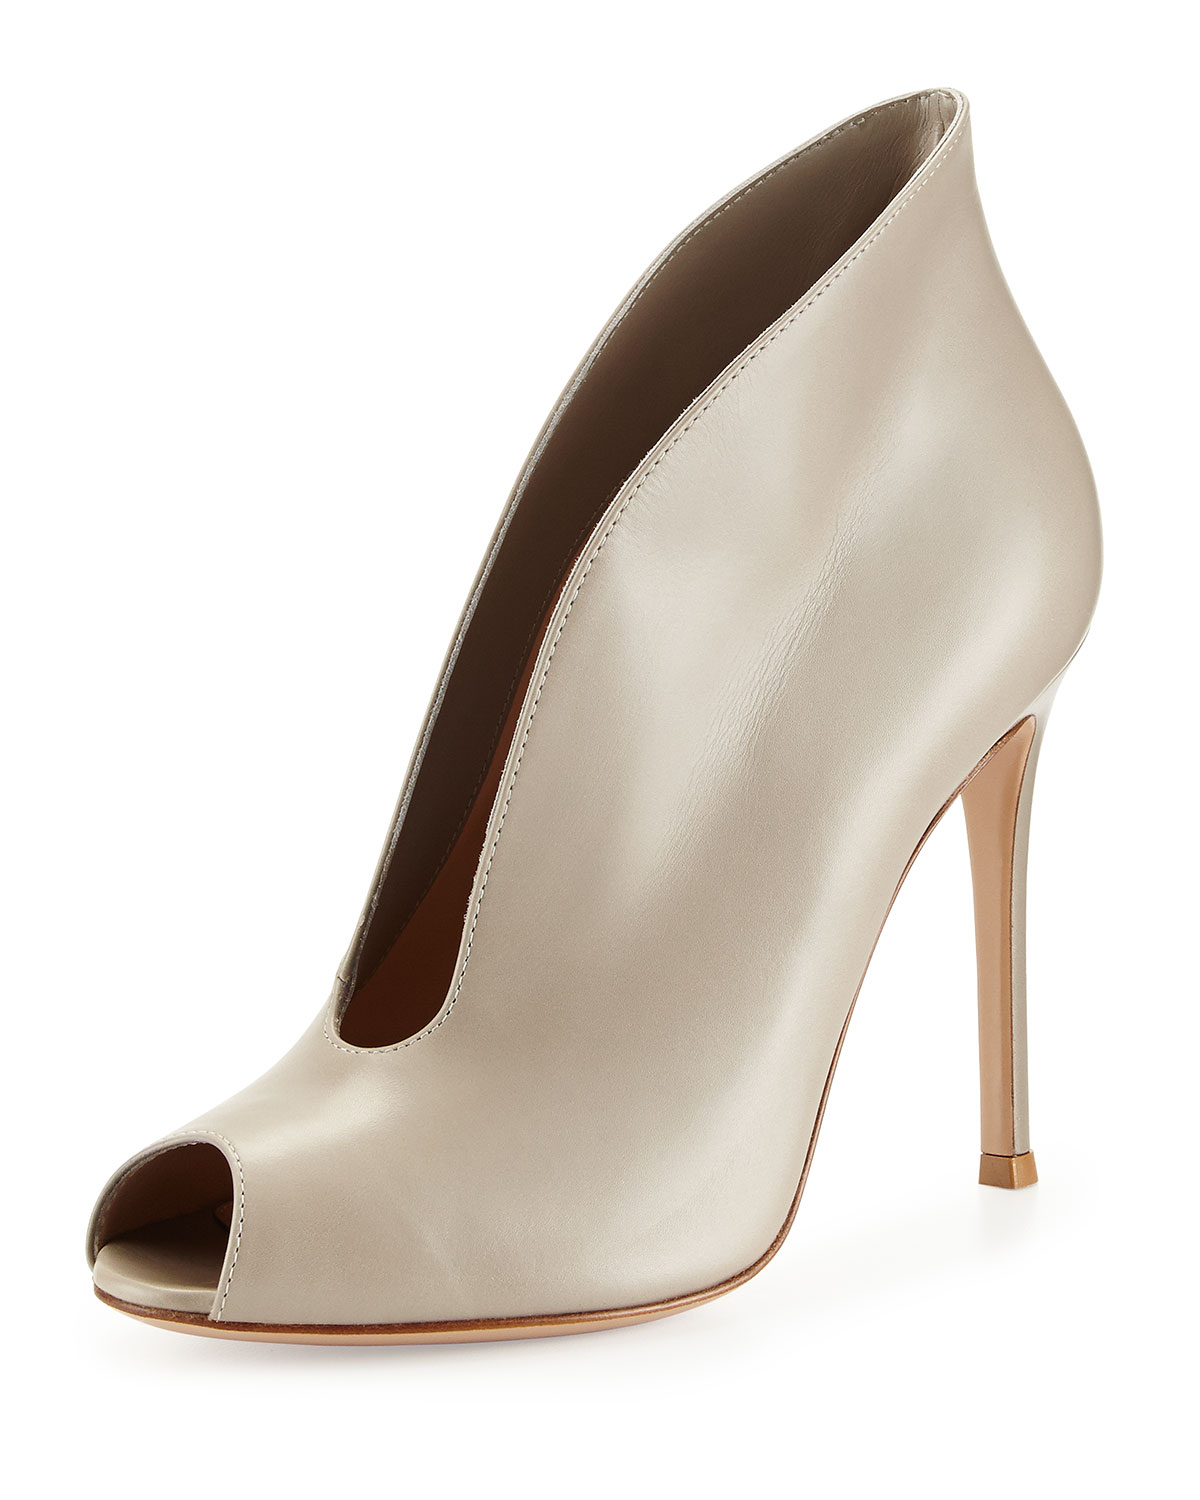 Lyst - Gianvito Rossi Leather V-Neck Peep-Toe Bootie in Natural